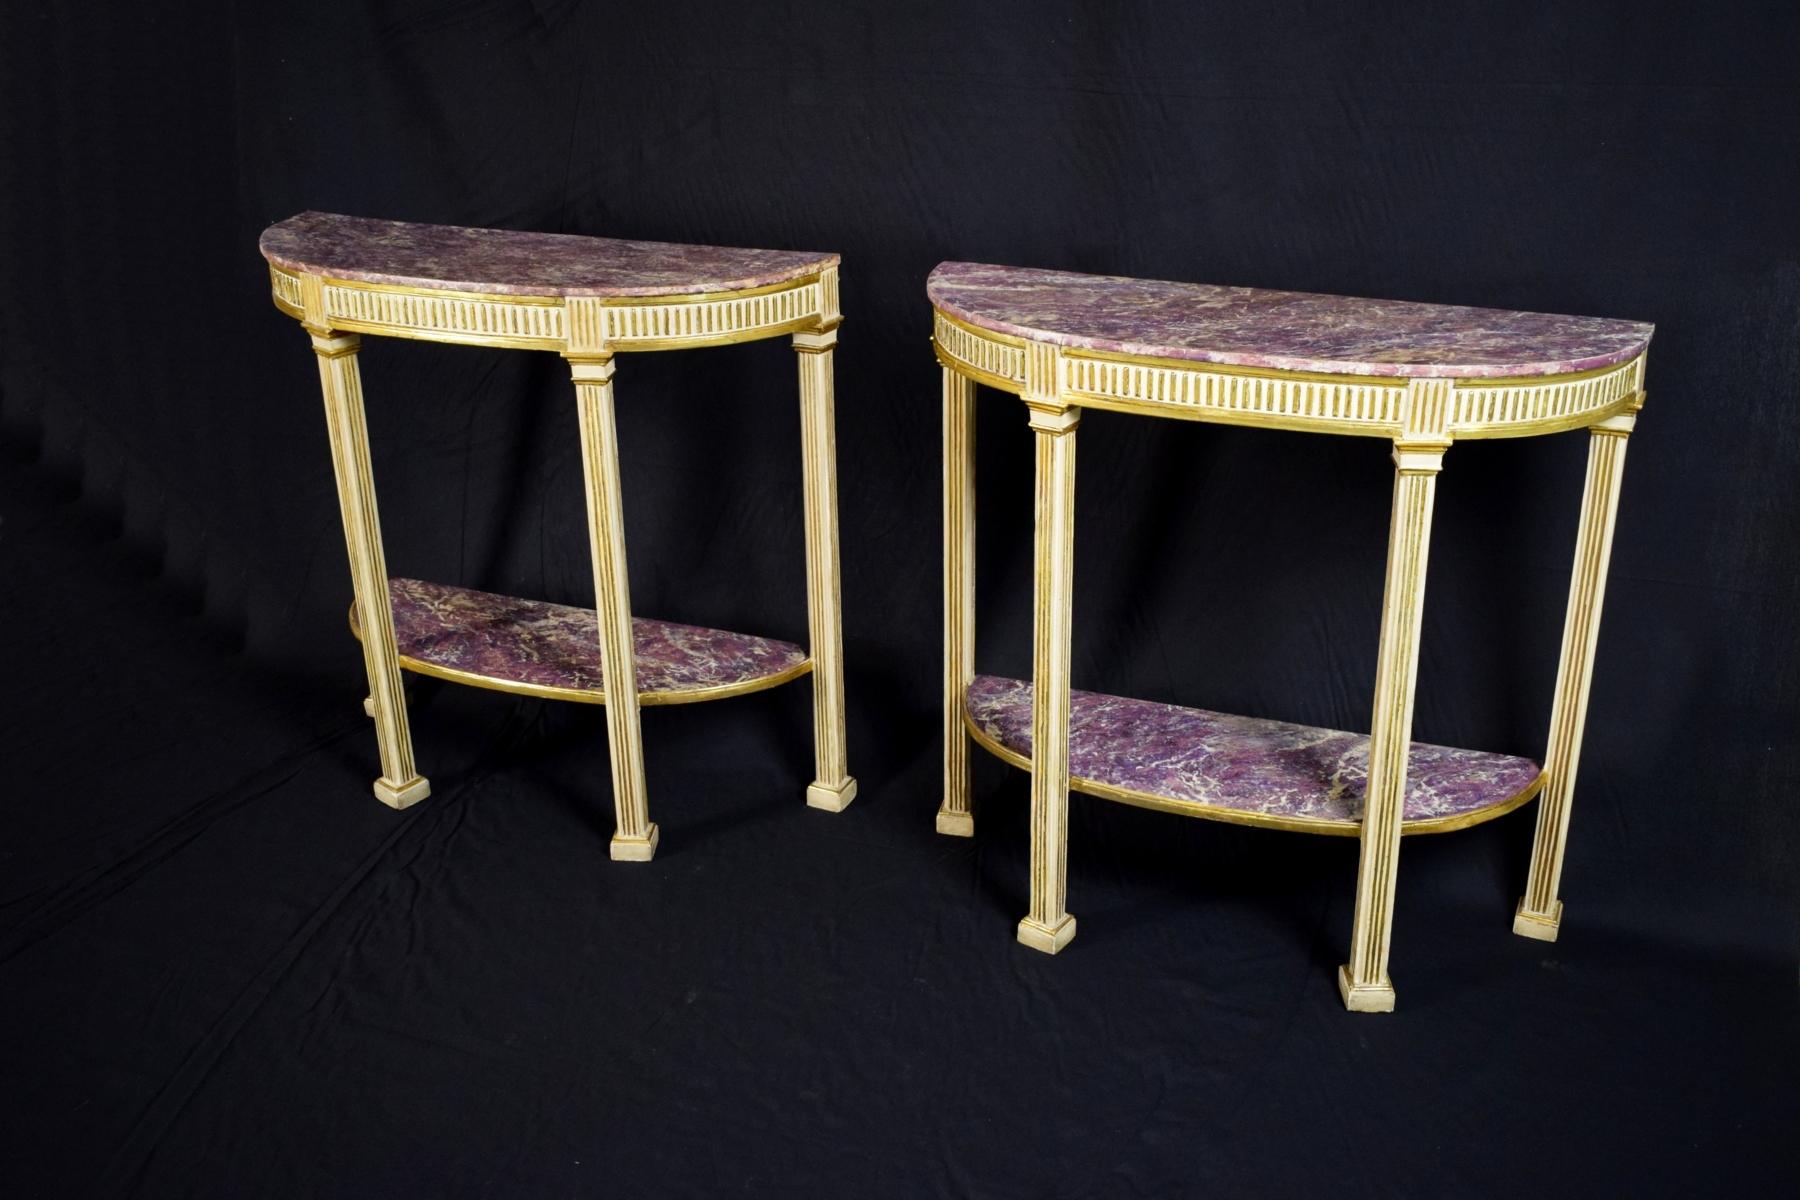 18th century, pair of Italian neoclassical lacquered and giltwood consoles

This pair of consoles was made in the second half of the 18th century in the neoclassical era, in Naples (Italy)
The carved and lacquered wooden consoles are composed of